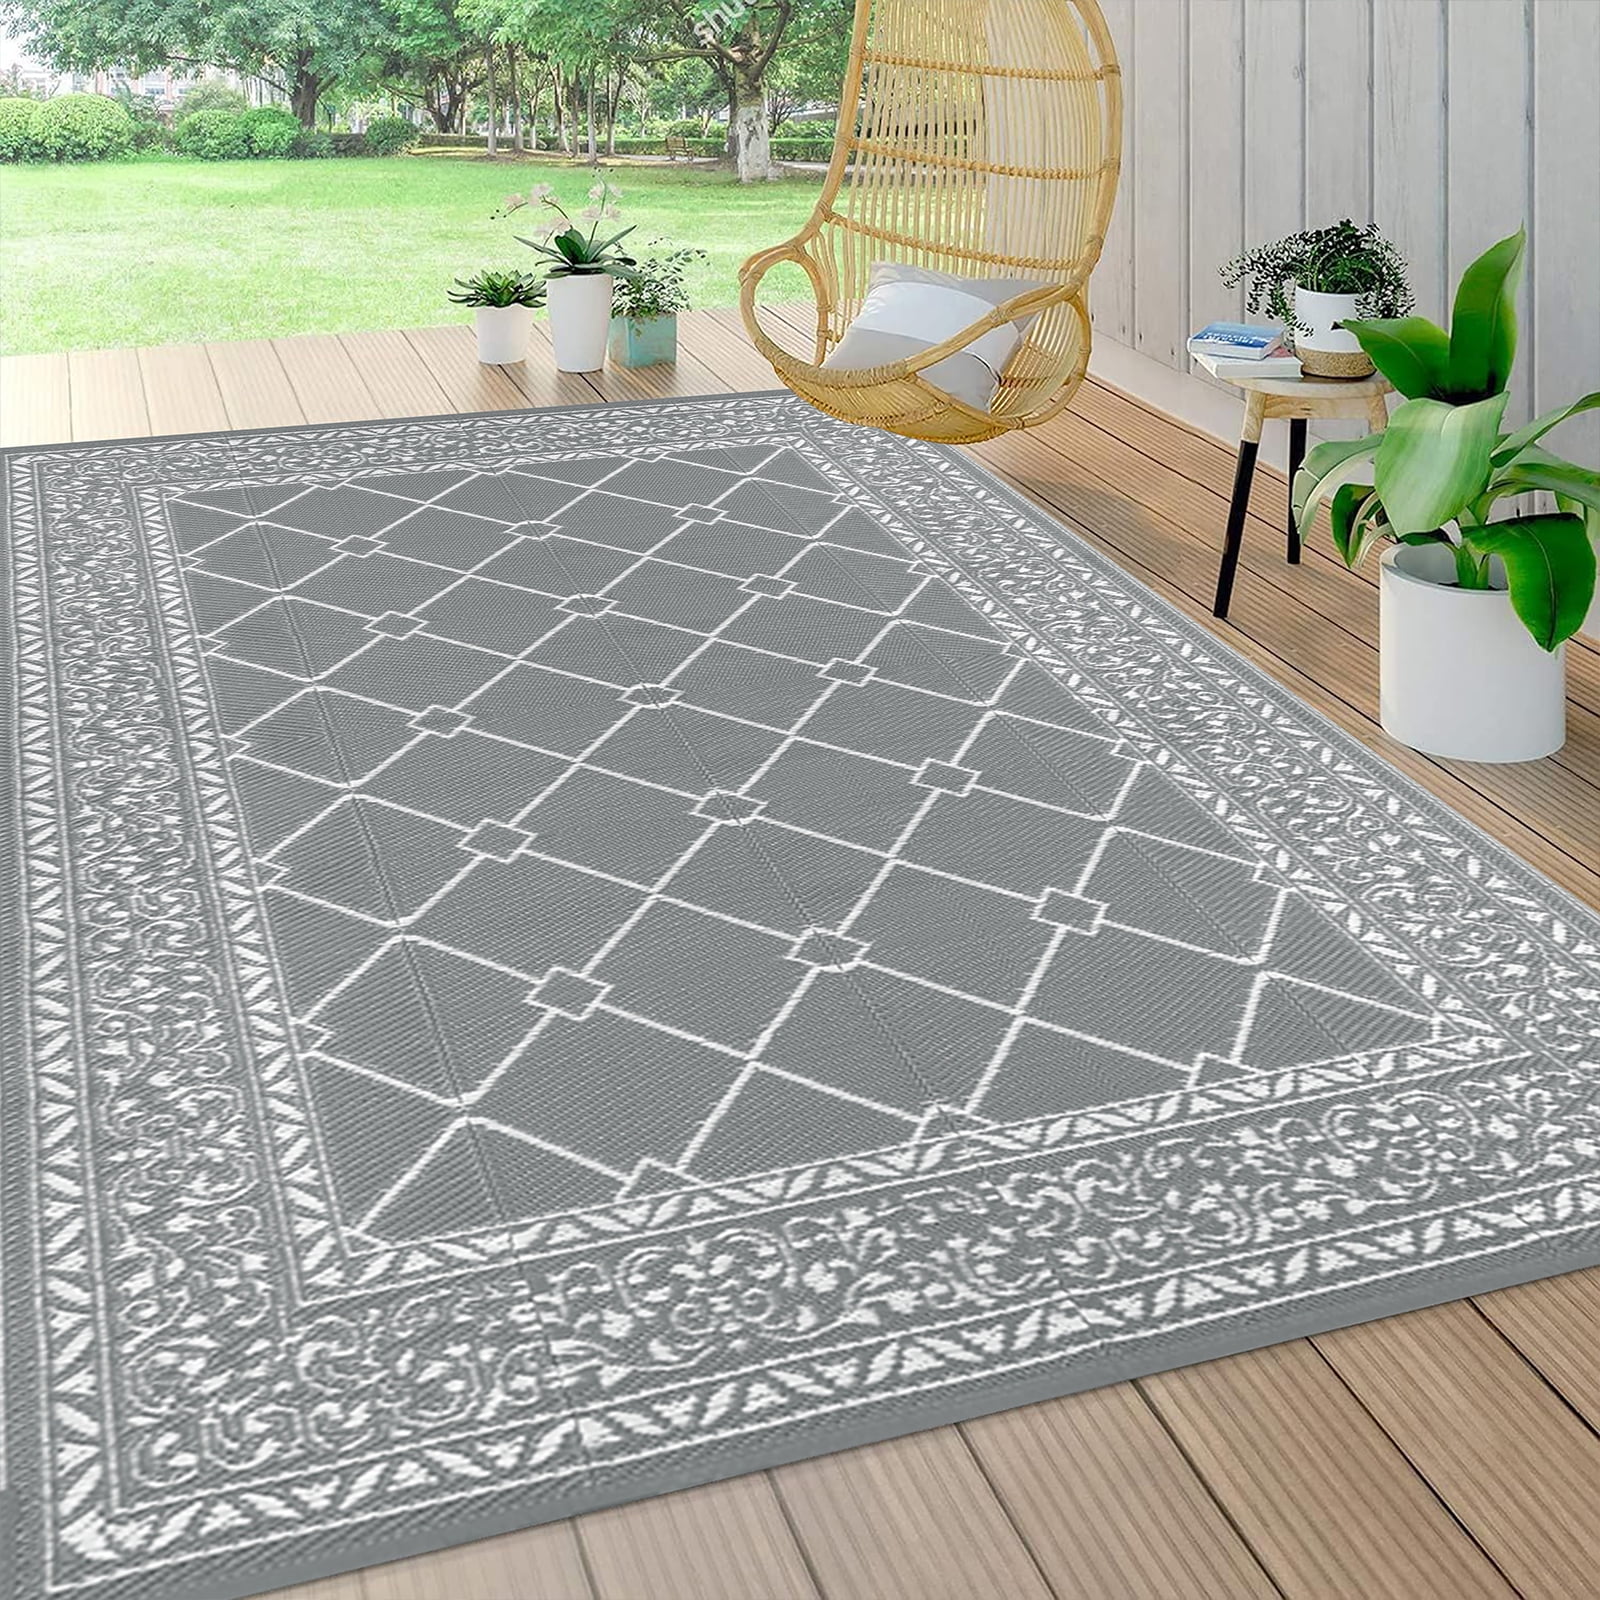 Rurality Outdoor Rugs 5x8 for Patios Clearance,Waterproof Mats for  Porch,Deck,Plastic Straw Area Rugs for Backyard,Balcony,Reversible,Geometric